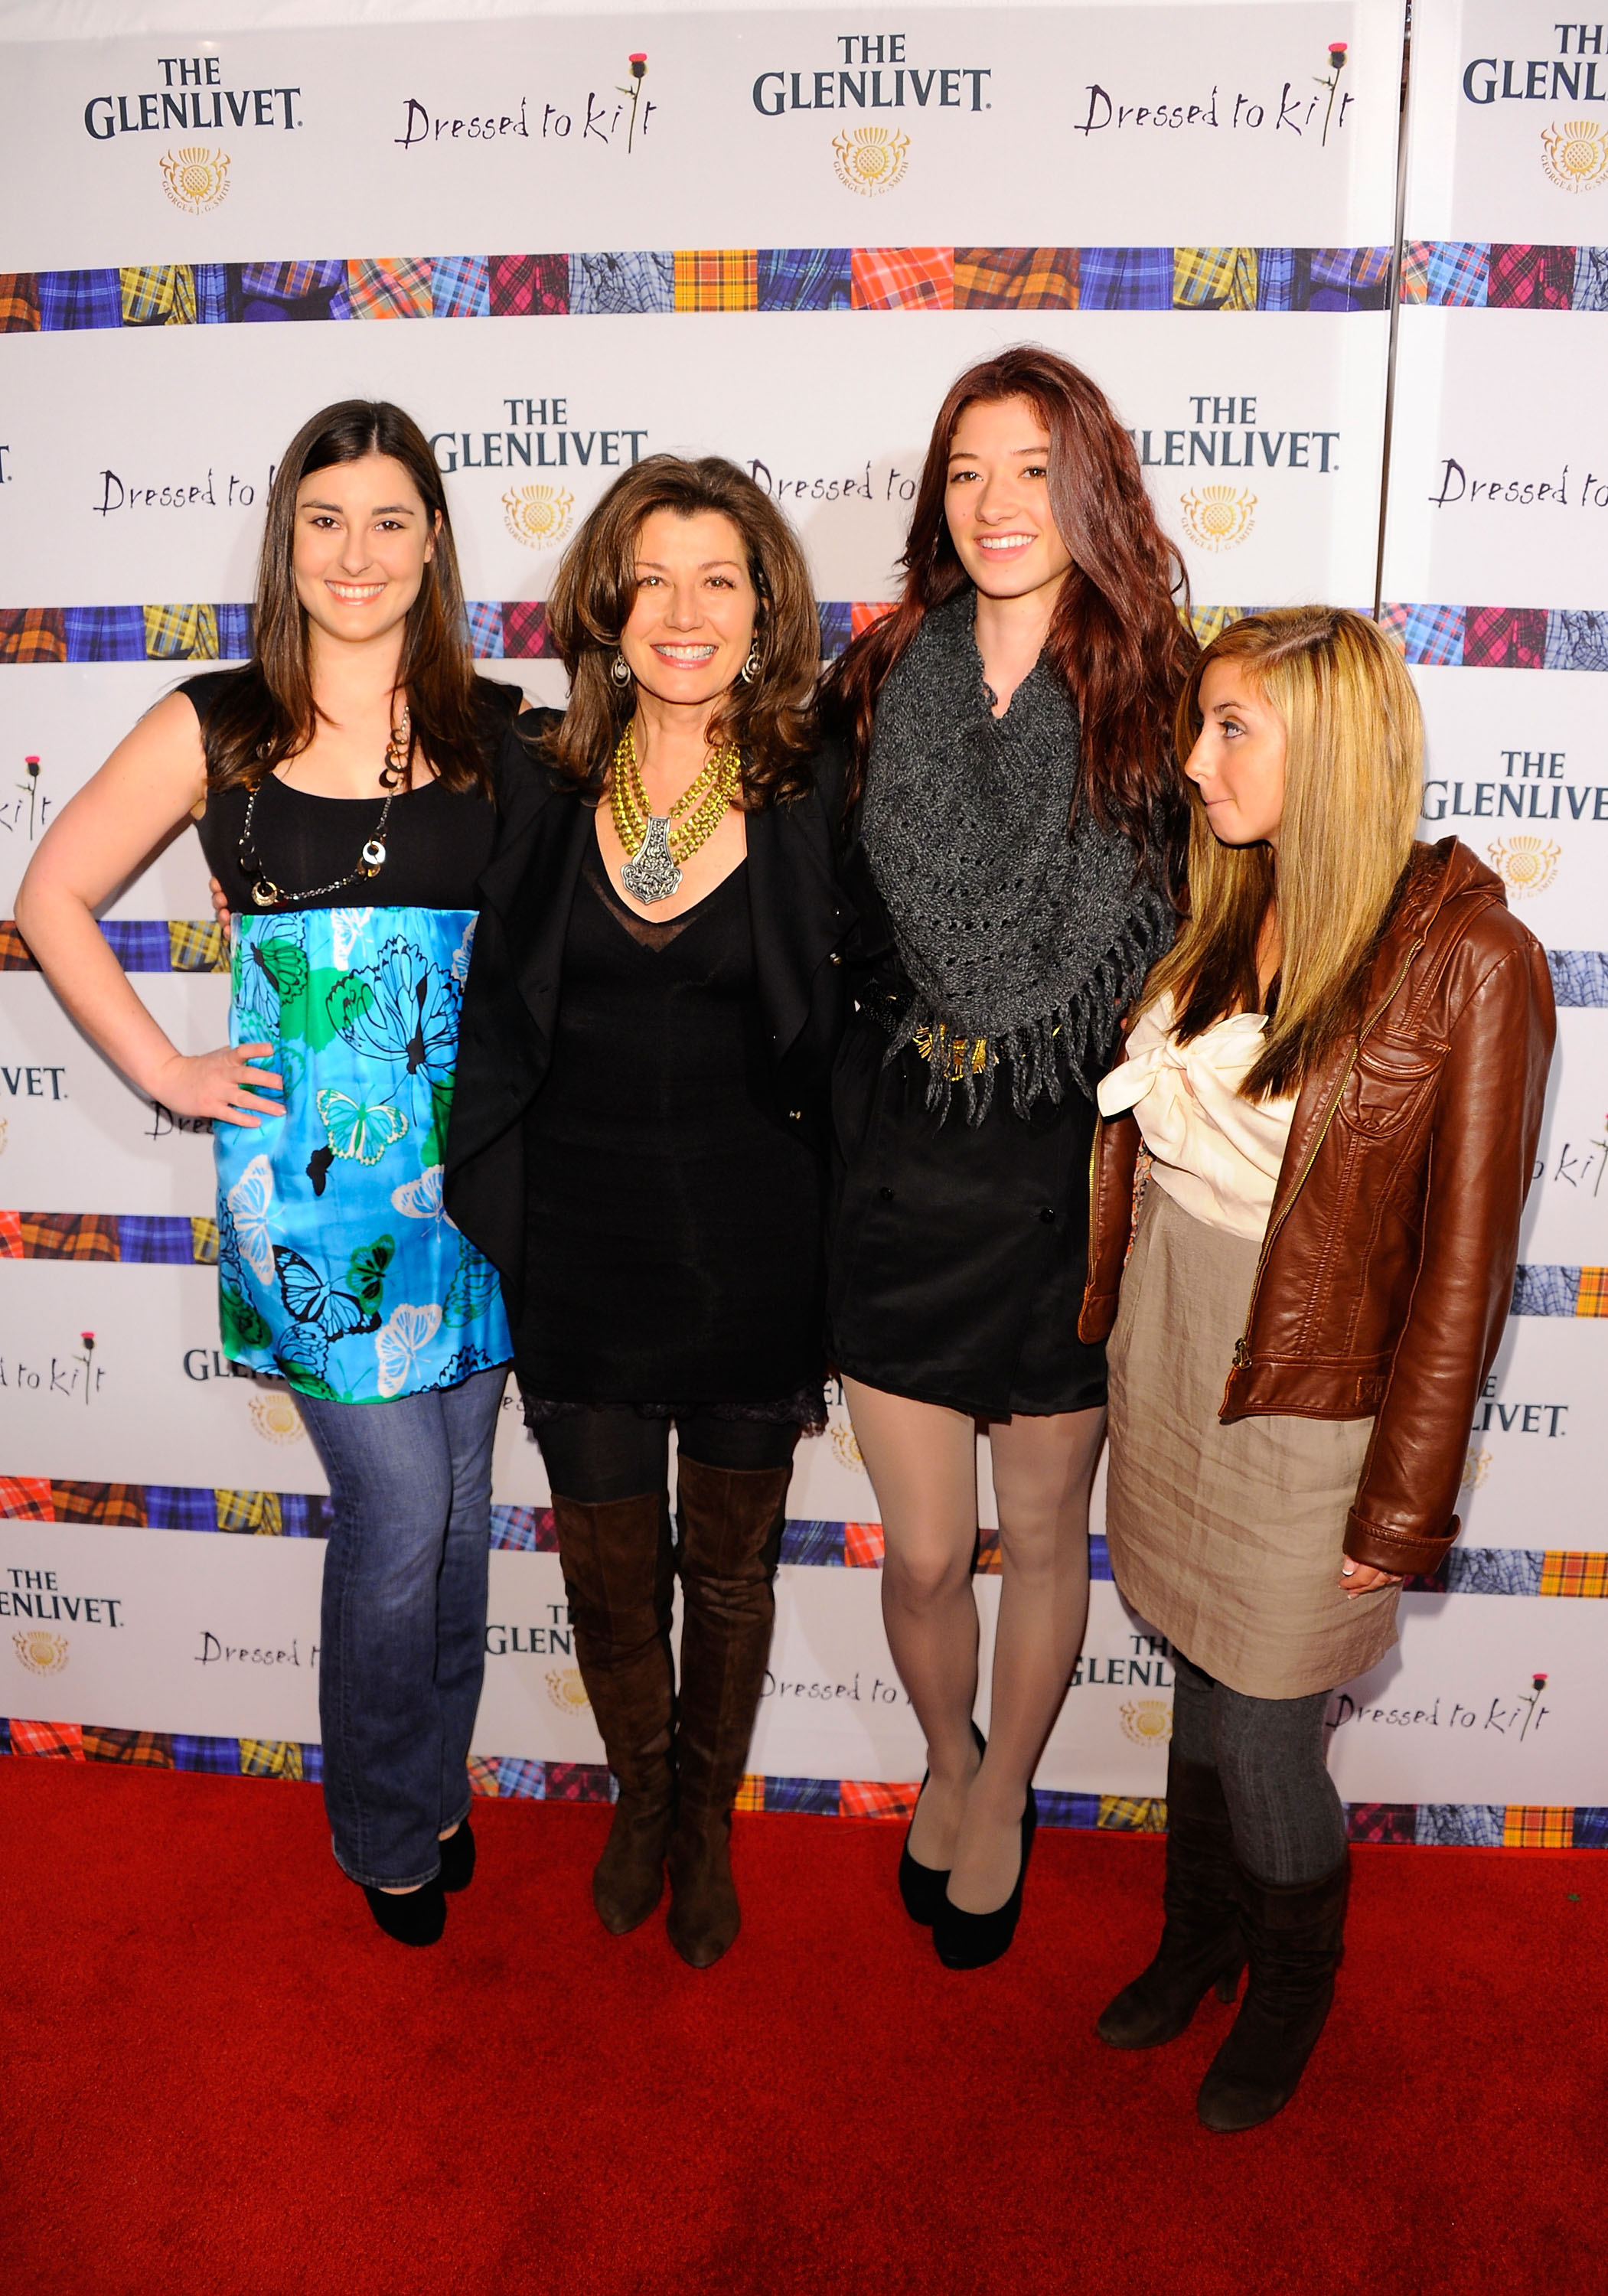 Sarah Chapman, Amy Grant, Millie Chapman, and Jenny Gill at the 9th Annual "Dressed To Kilt" Charity Fashion Show on April 5, 2011, in New York City | Source: Getty Images